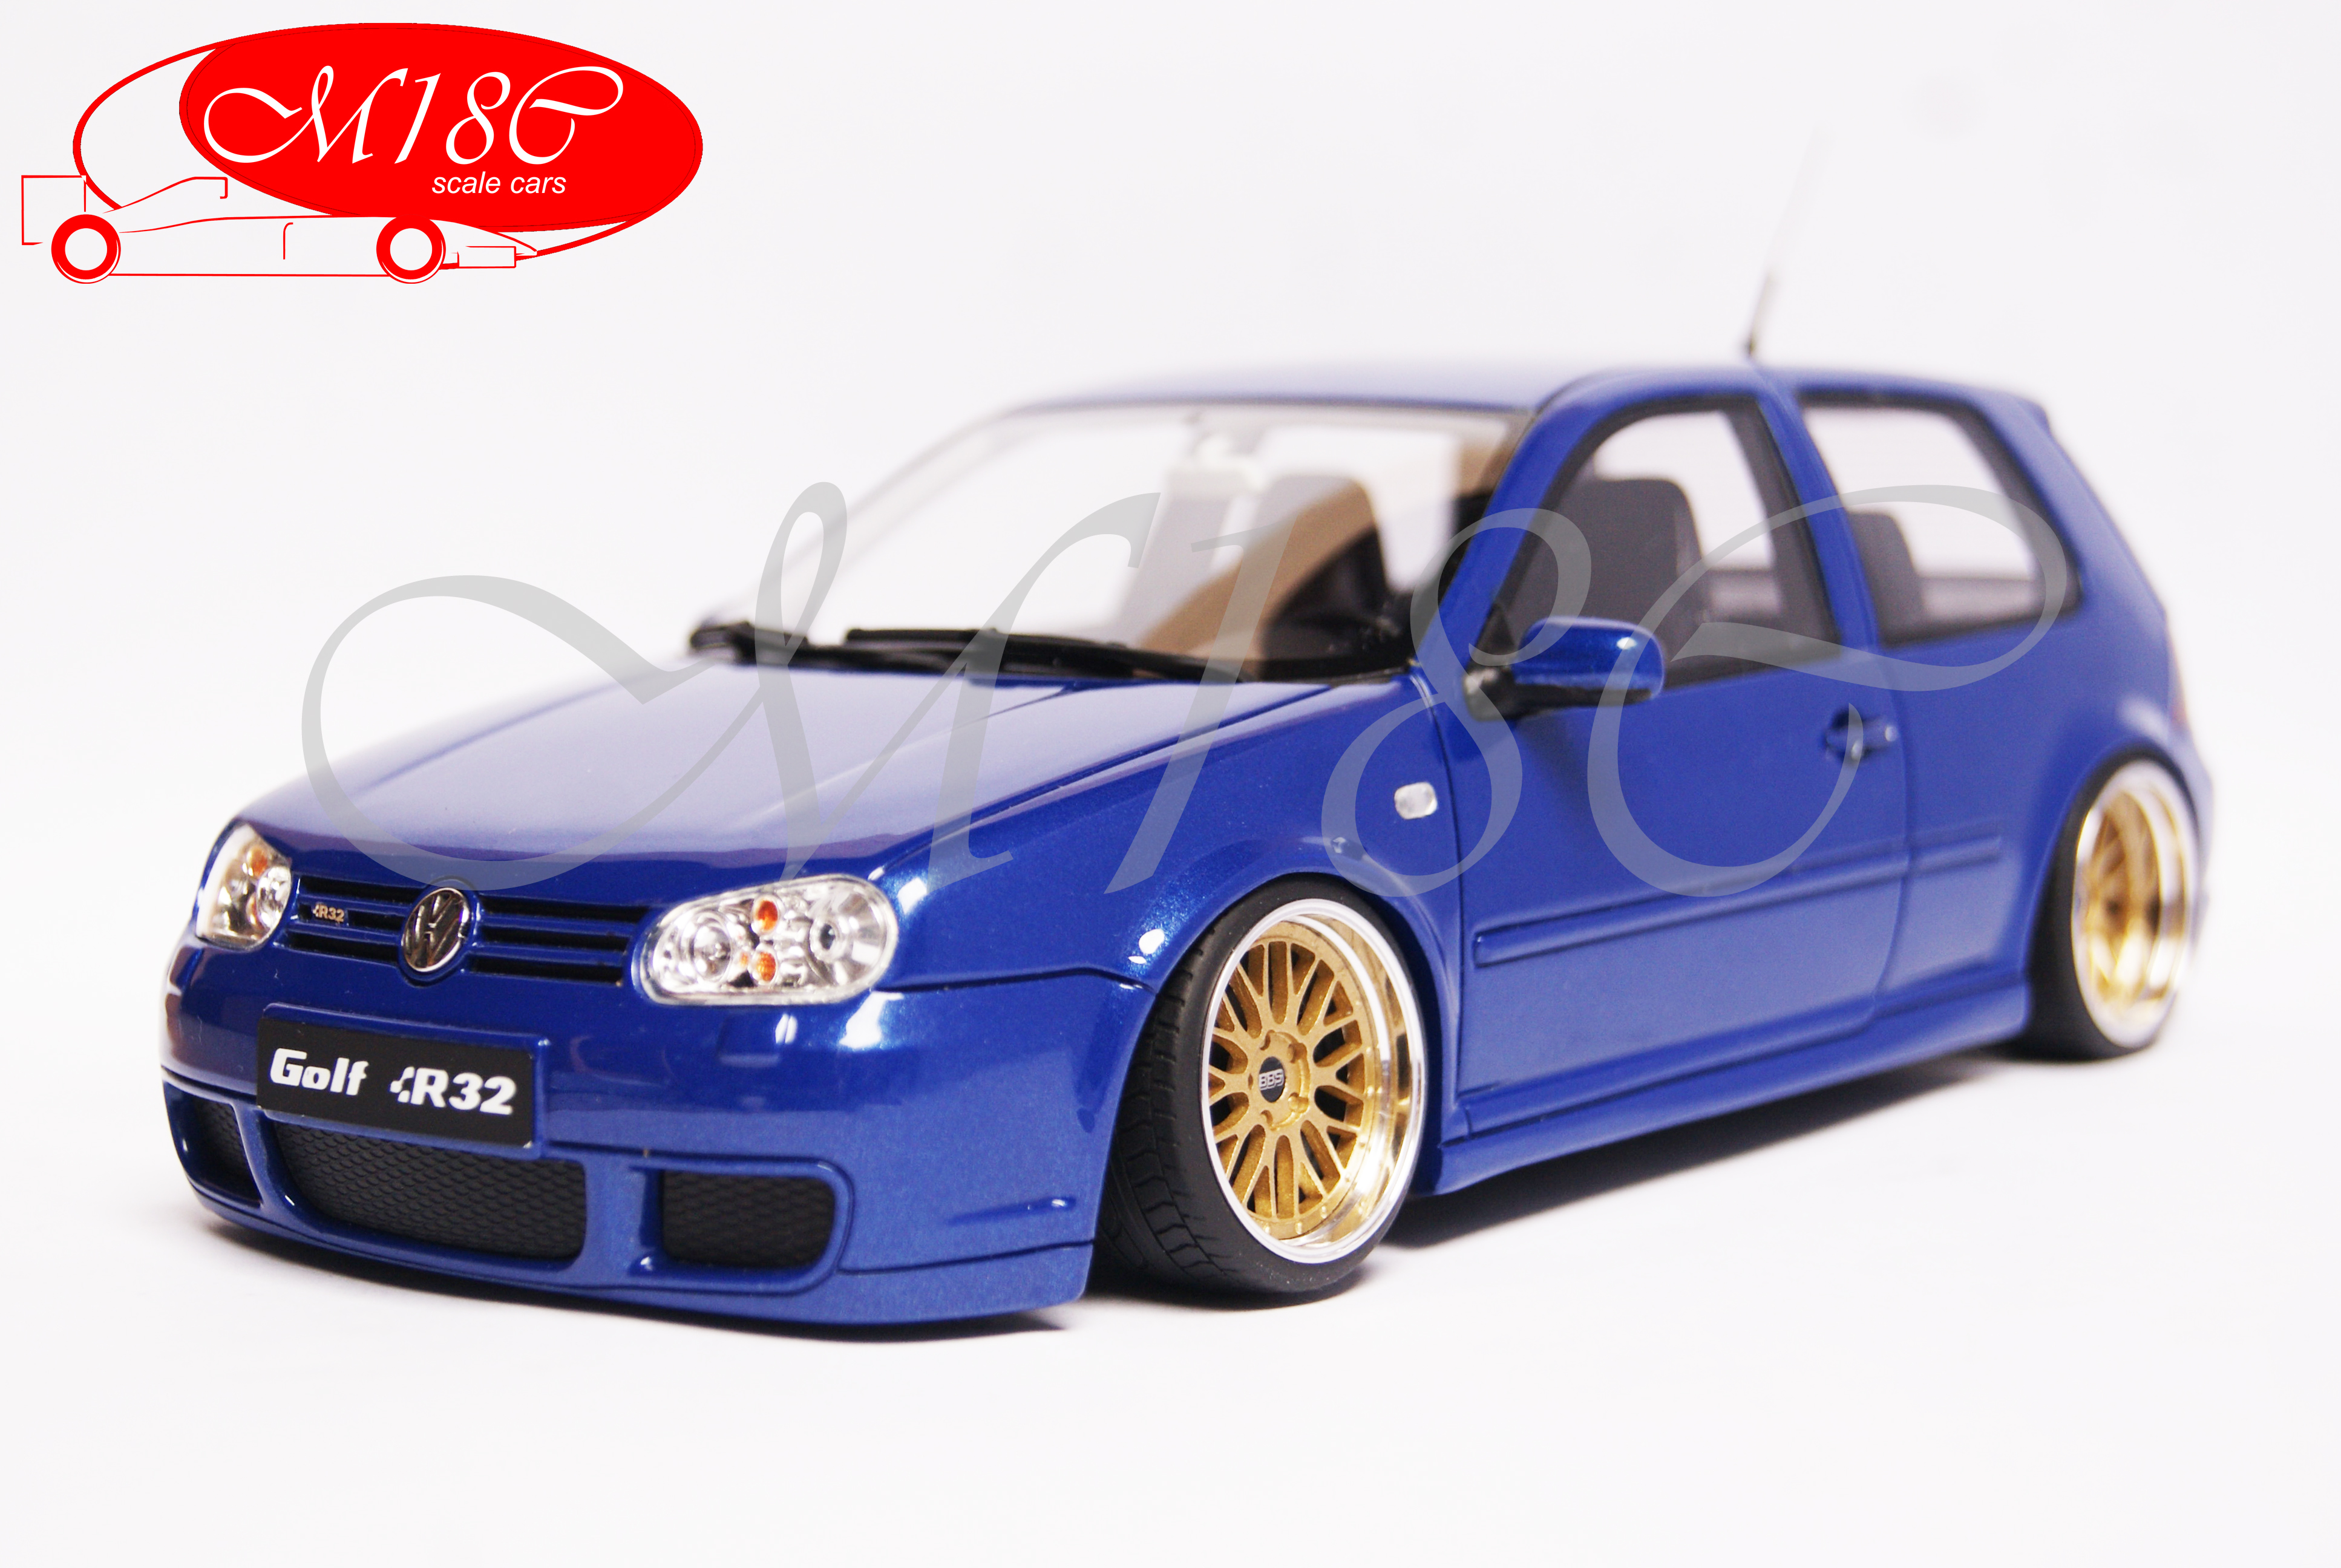 Volkswagen Golf IV R32 1/18 Ottomobile IV R32 bleu jantes BBS 19 pouces bords larges tuning modellino in miniatura